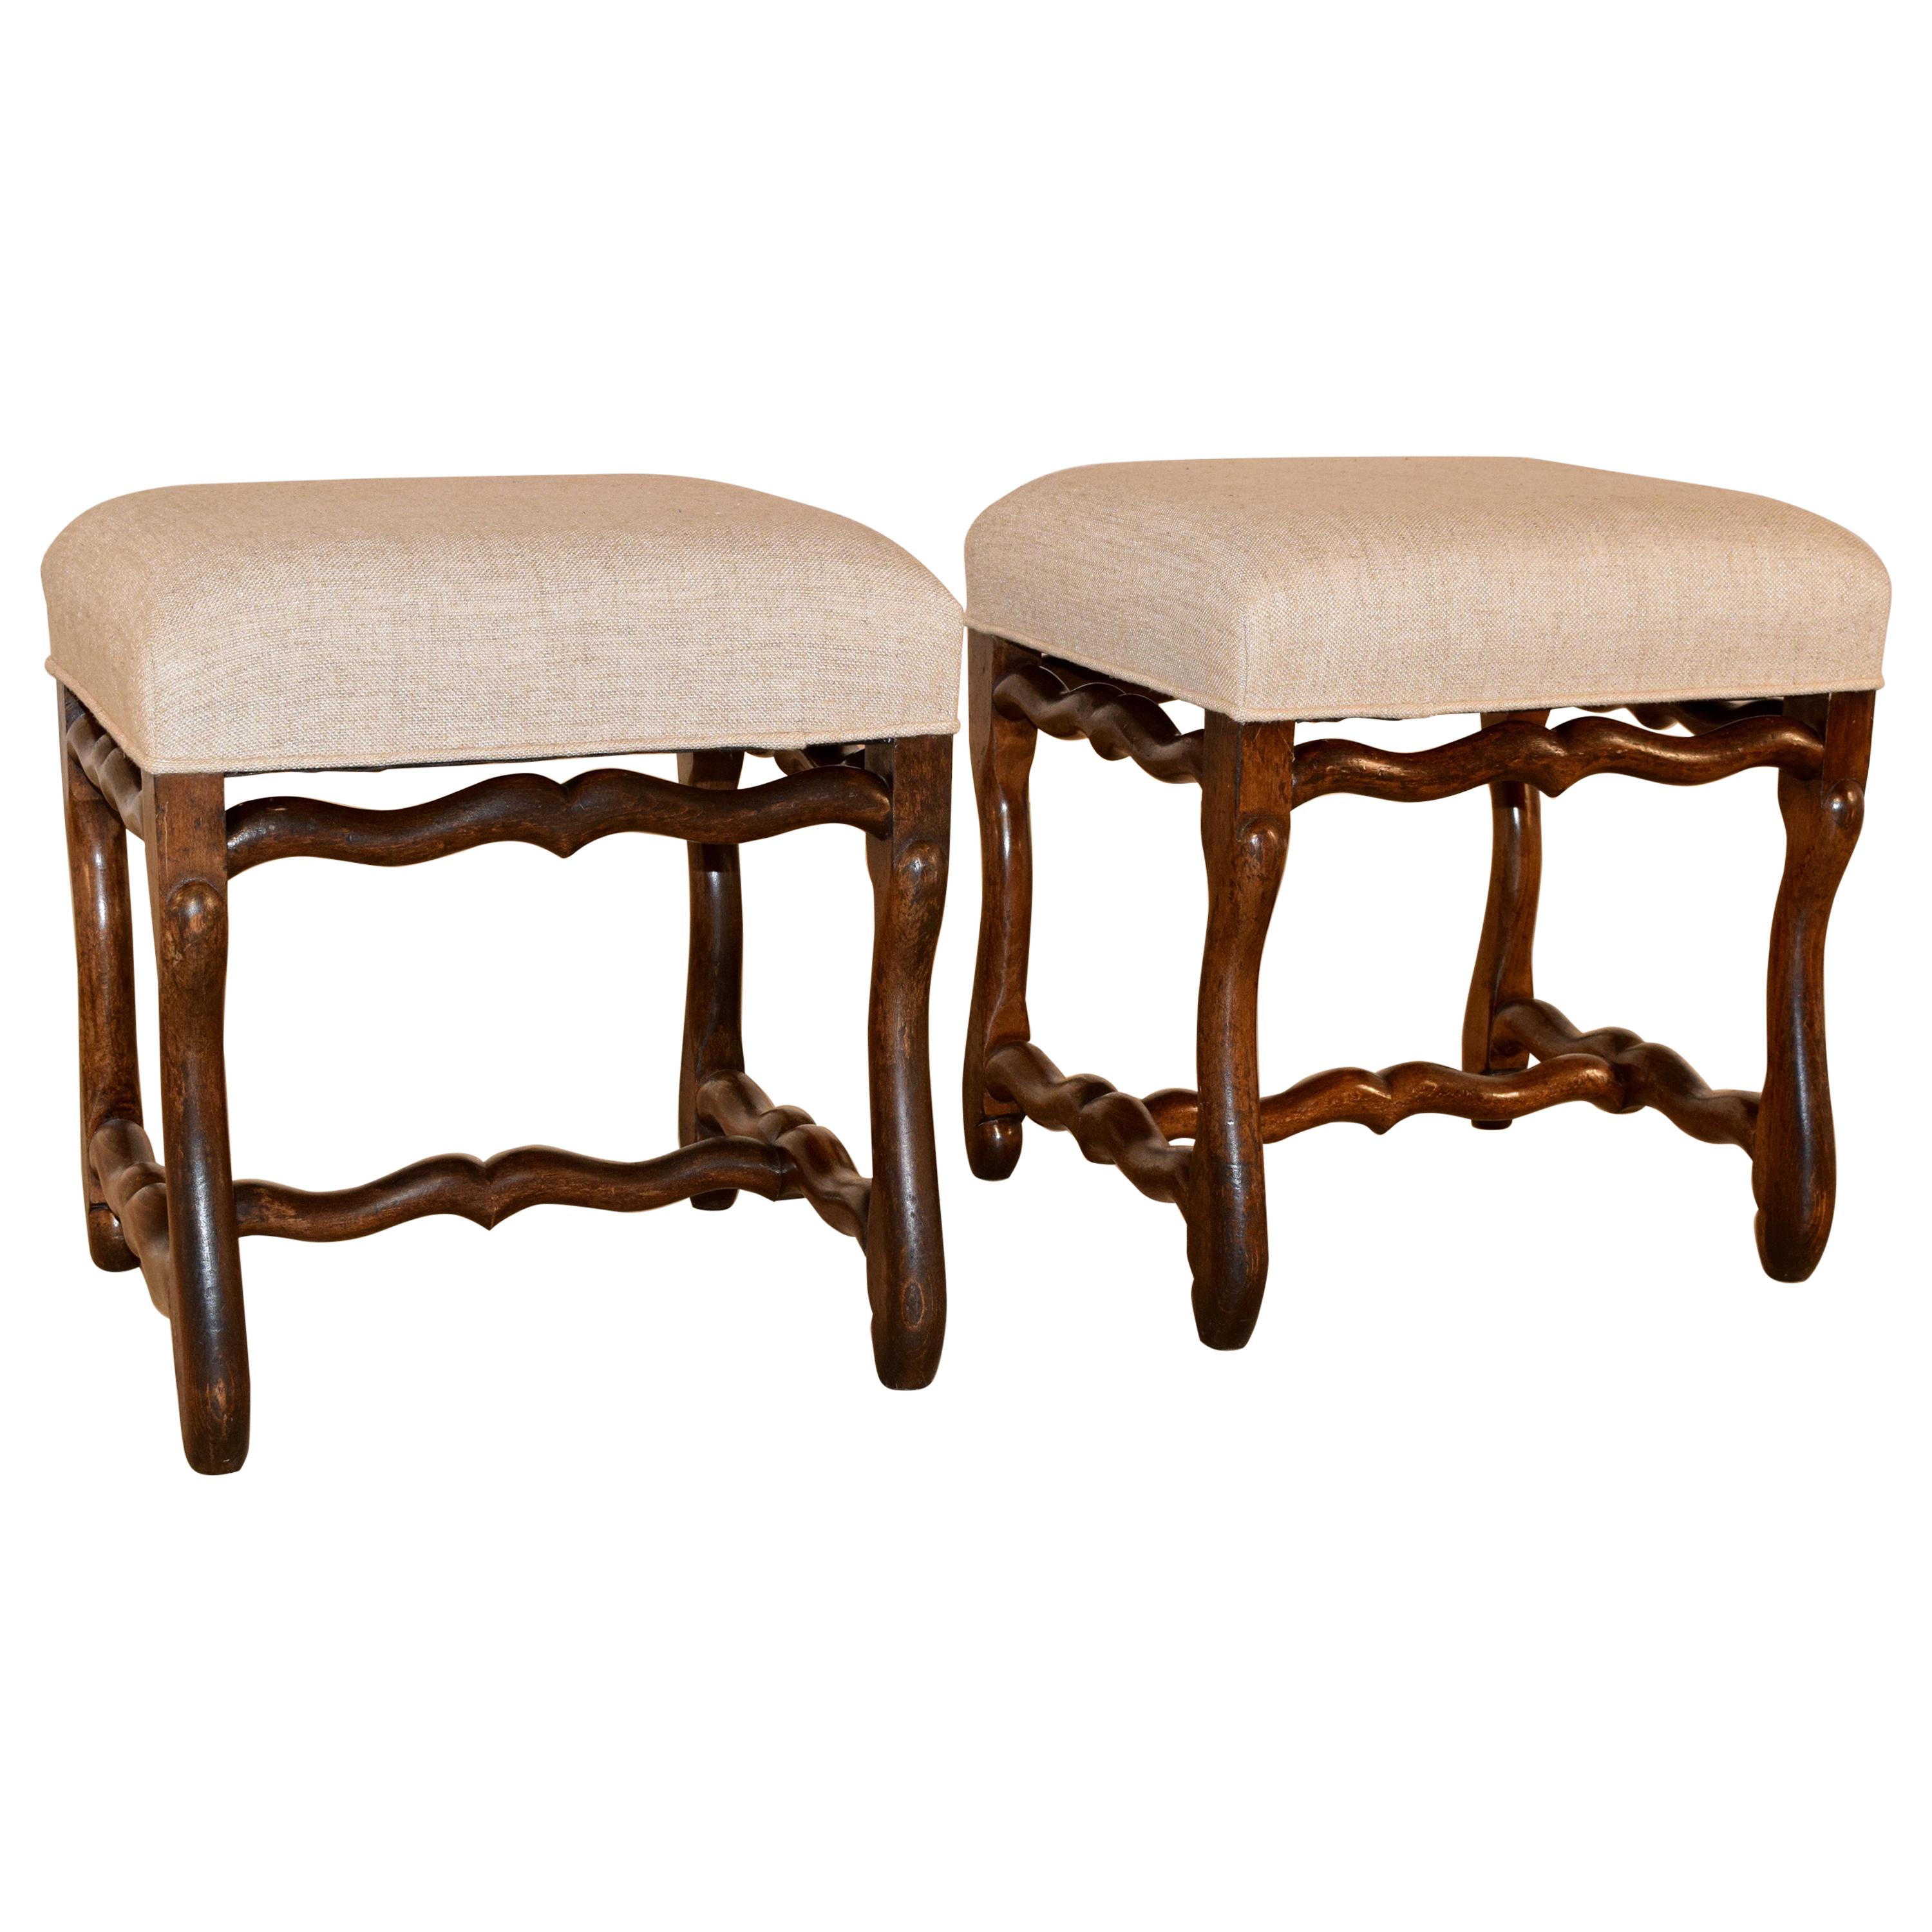 19th Century Pair of French Mutton Leg Stools